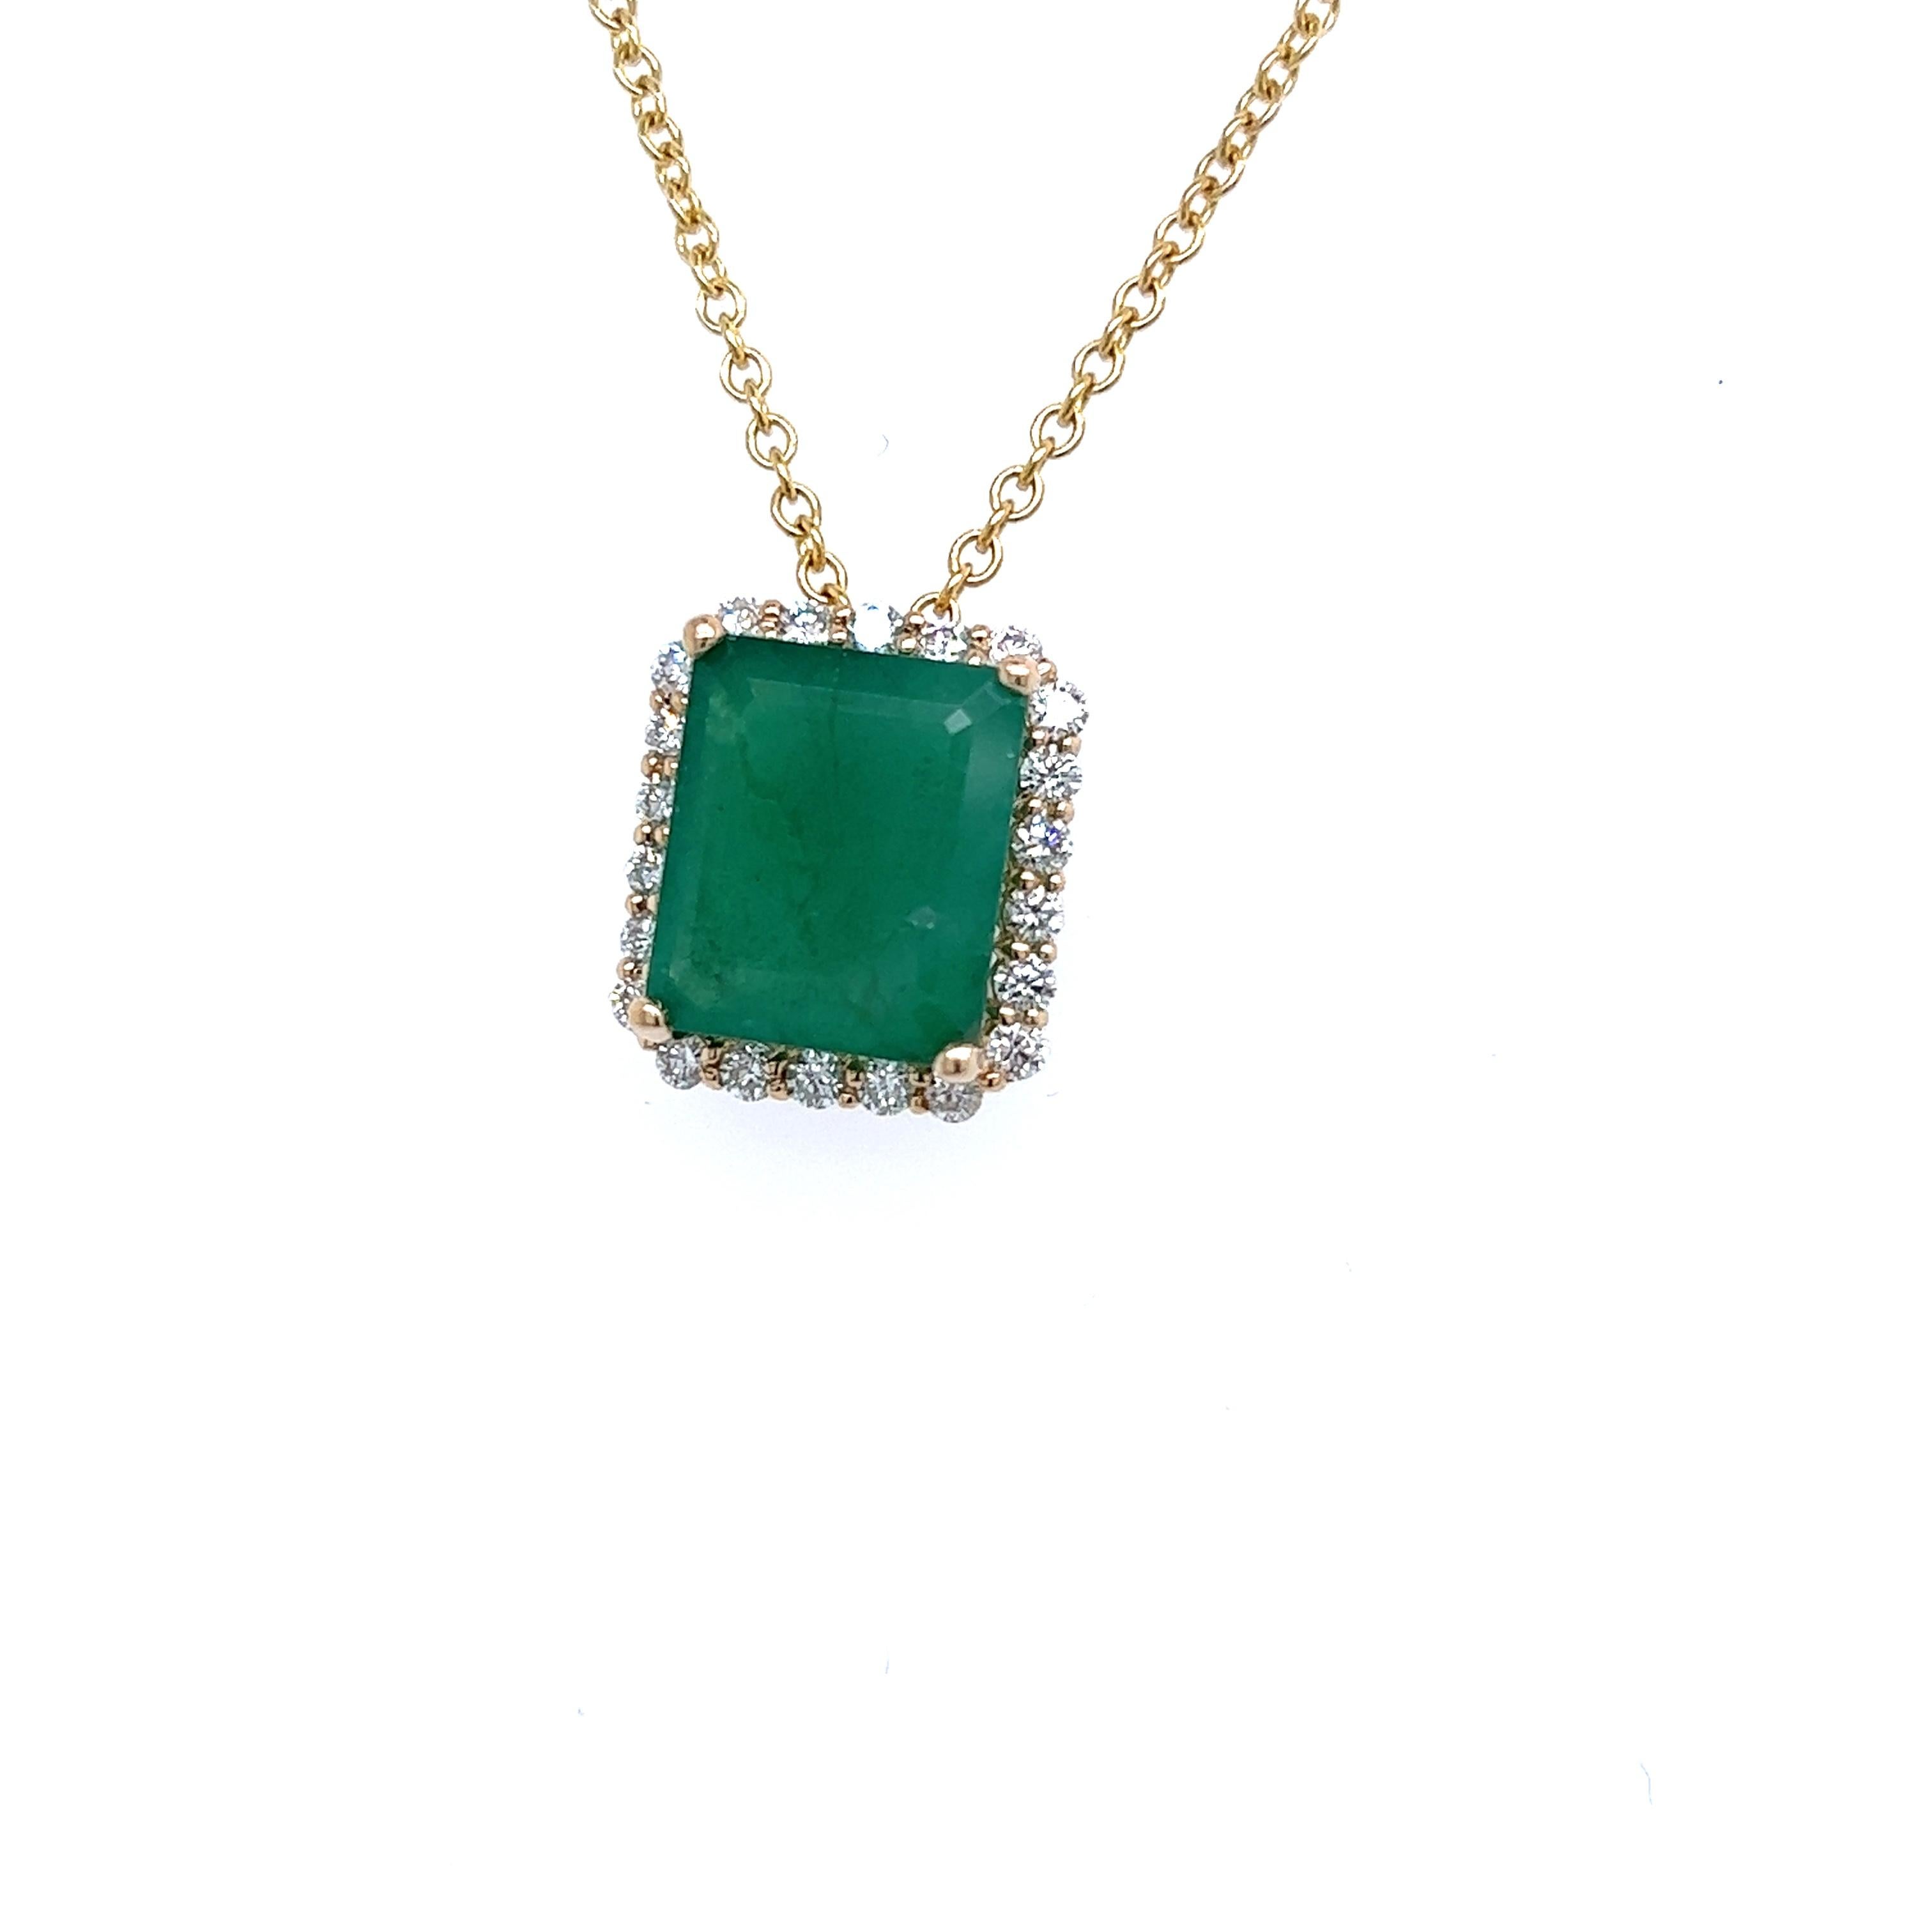 Natural Emerald Diamond Pendant Necklace 14k Yellow Gold 5.05 TCW Certified In New Condition For Sale In Brooklyn, NY